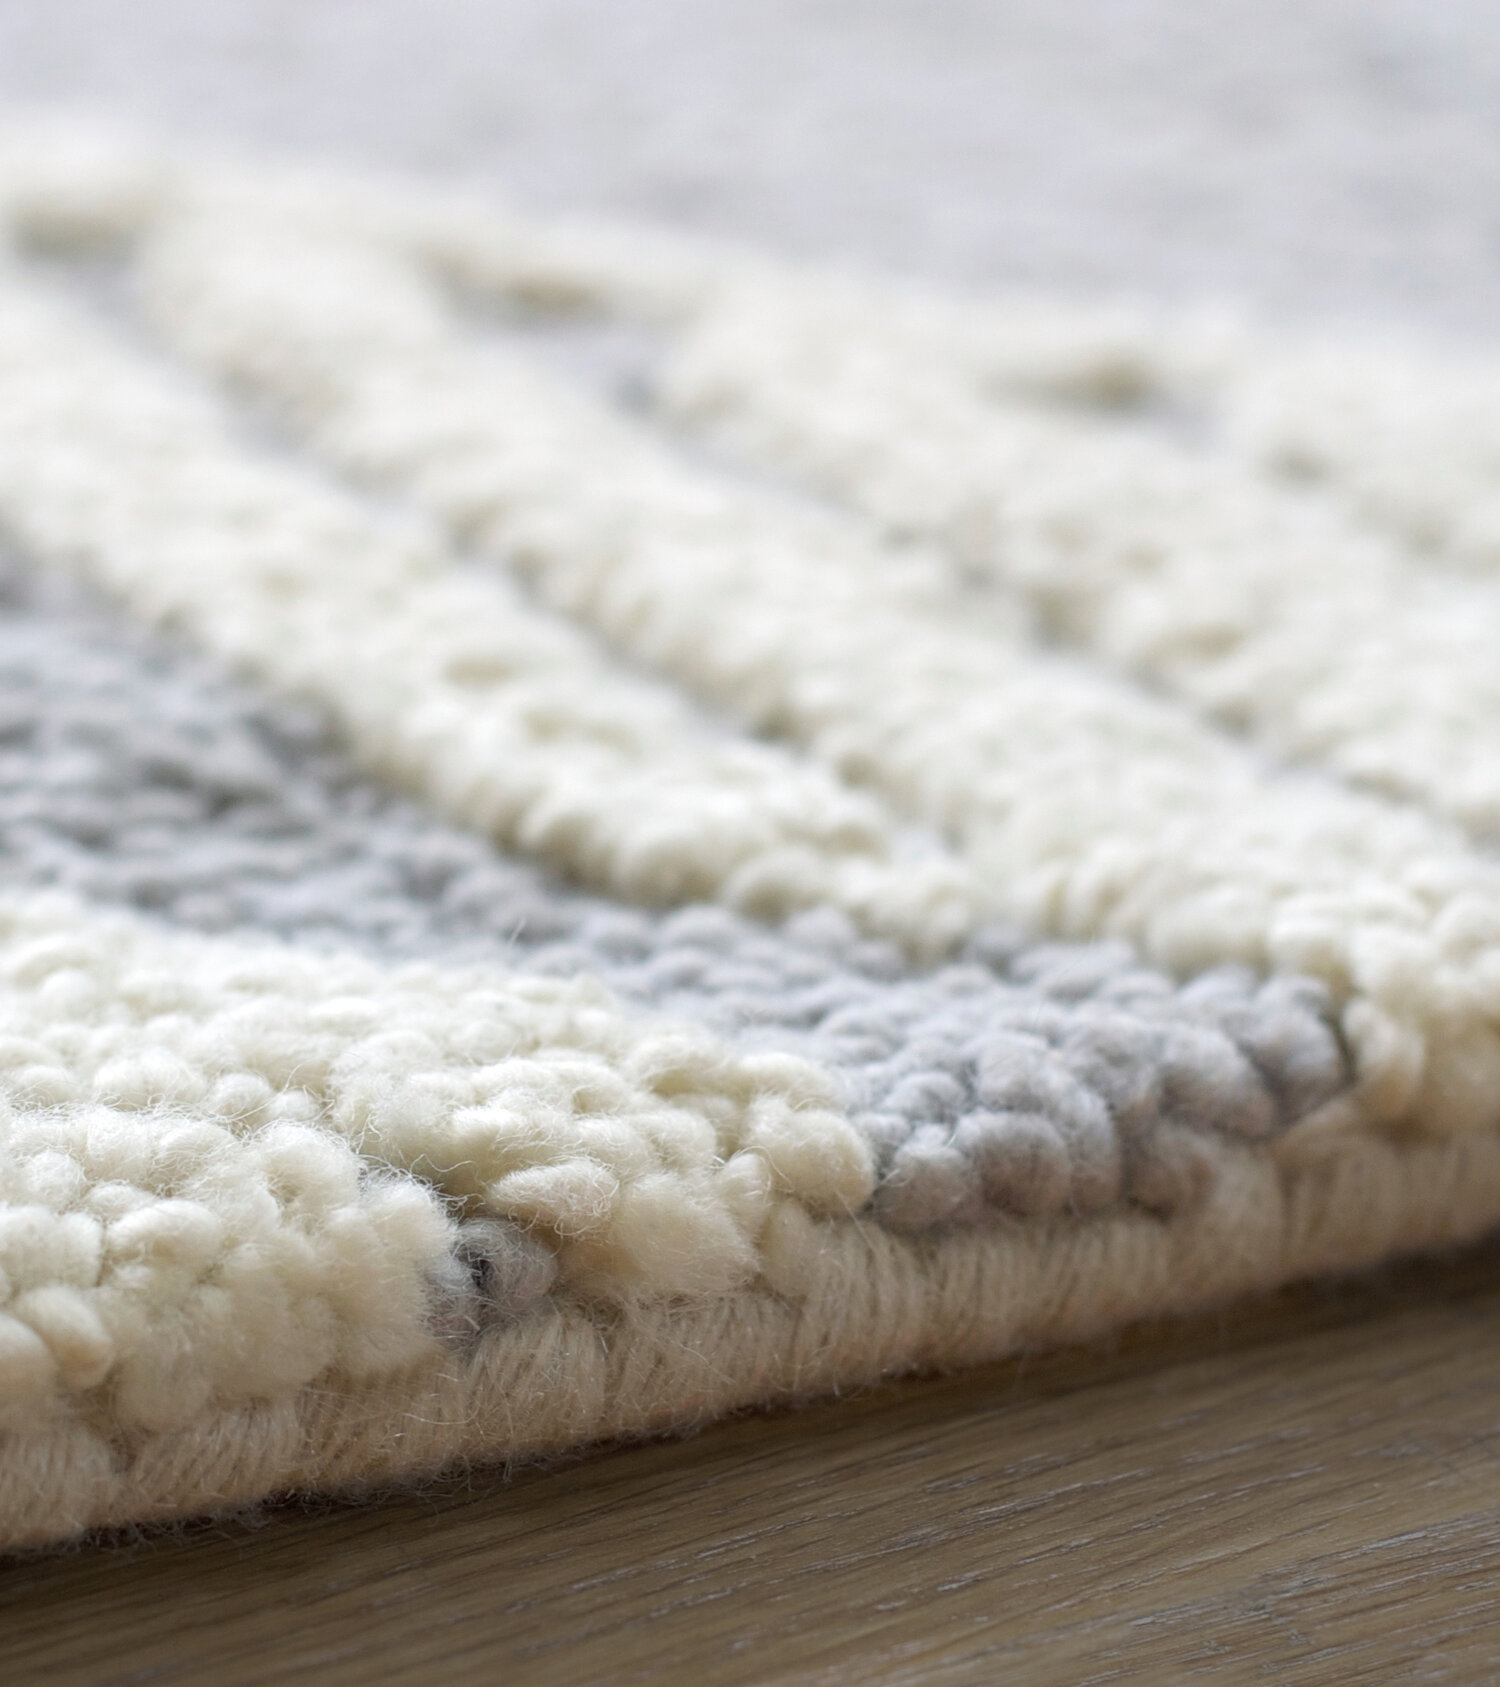 100% Pure New Zealand wool rugs. Goodweave certified, sustainable